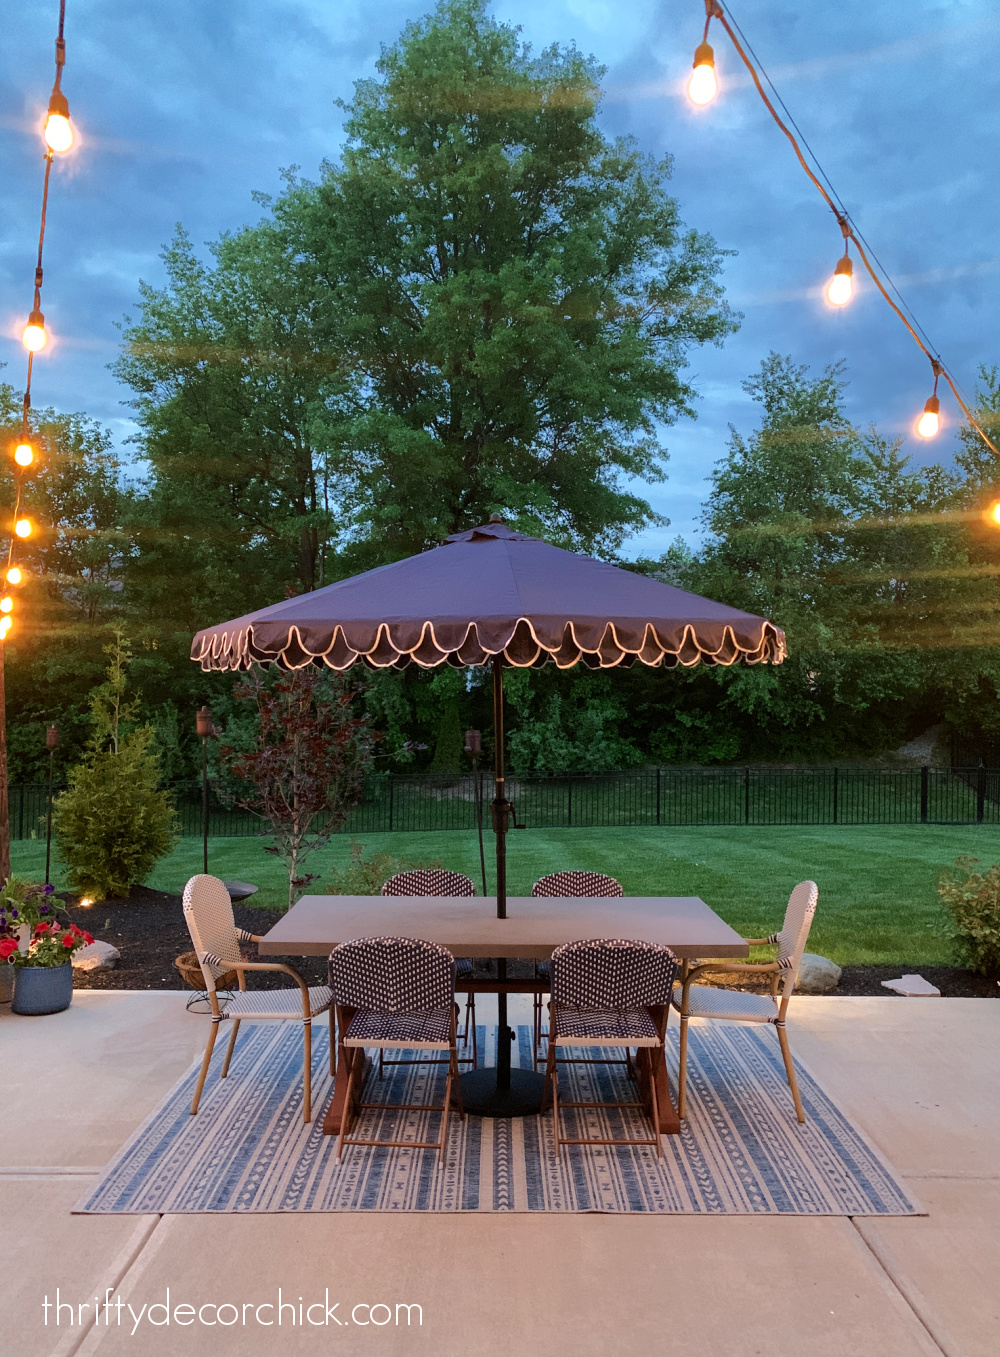 scalloped umbrella over dining table